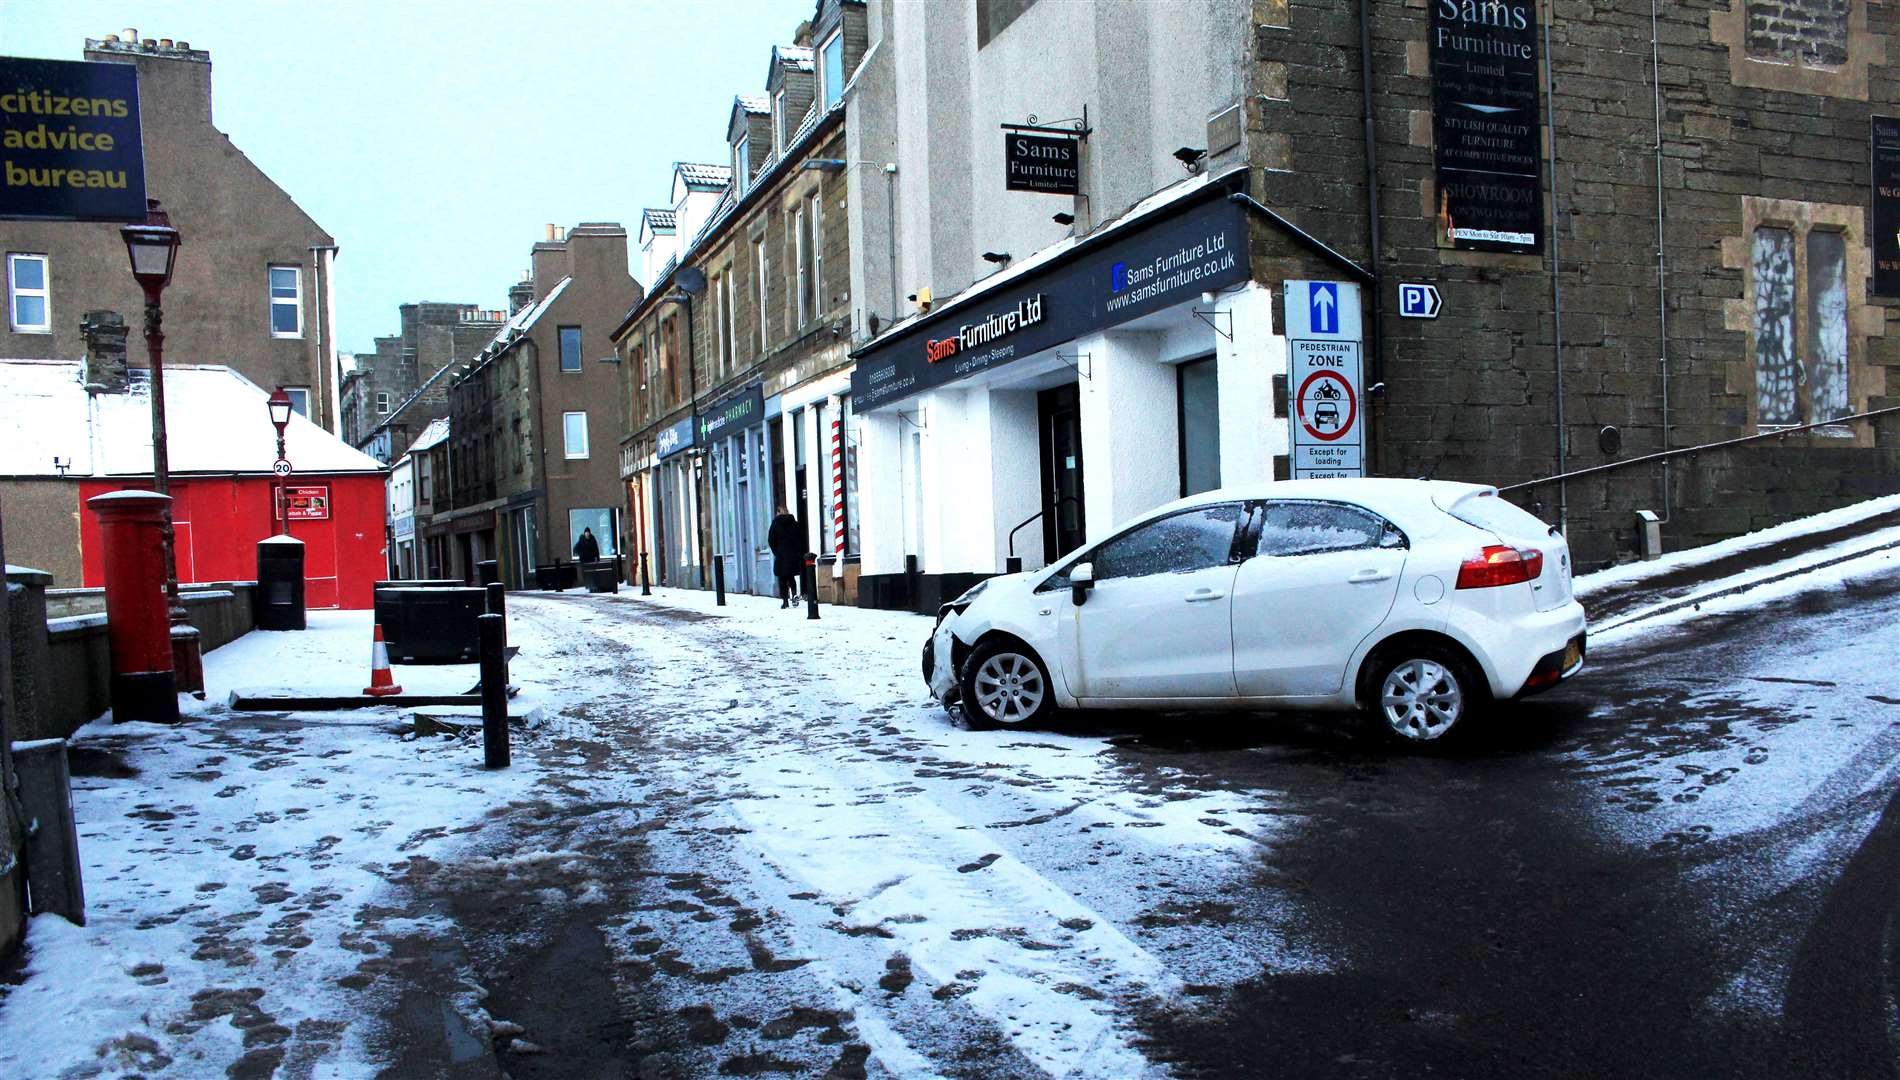 A car appeared to have slid in the snow at the bottom of Shore Lane in Wick, striking a large 'pedestrian zone' sign at the eastern end of High Street.